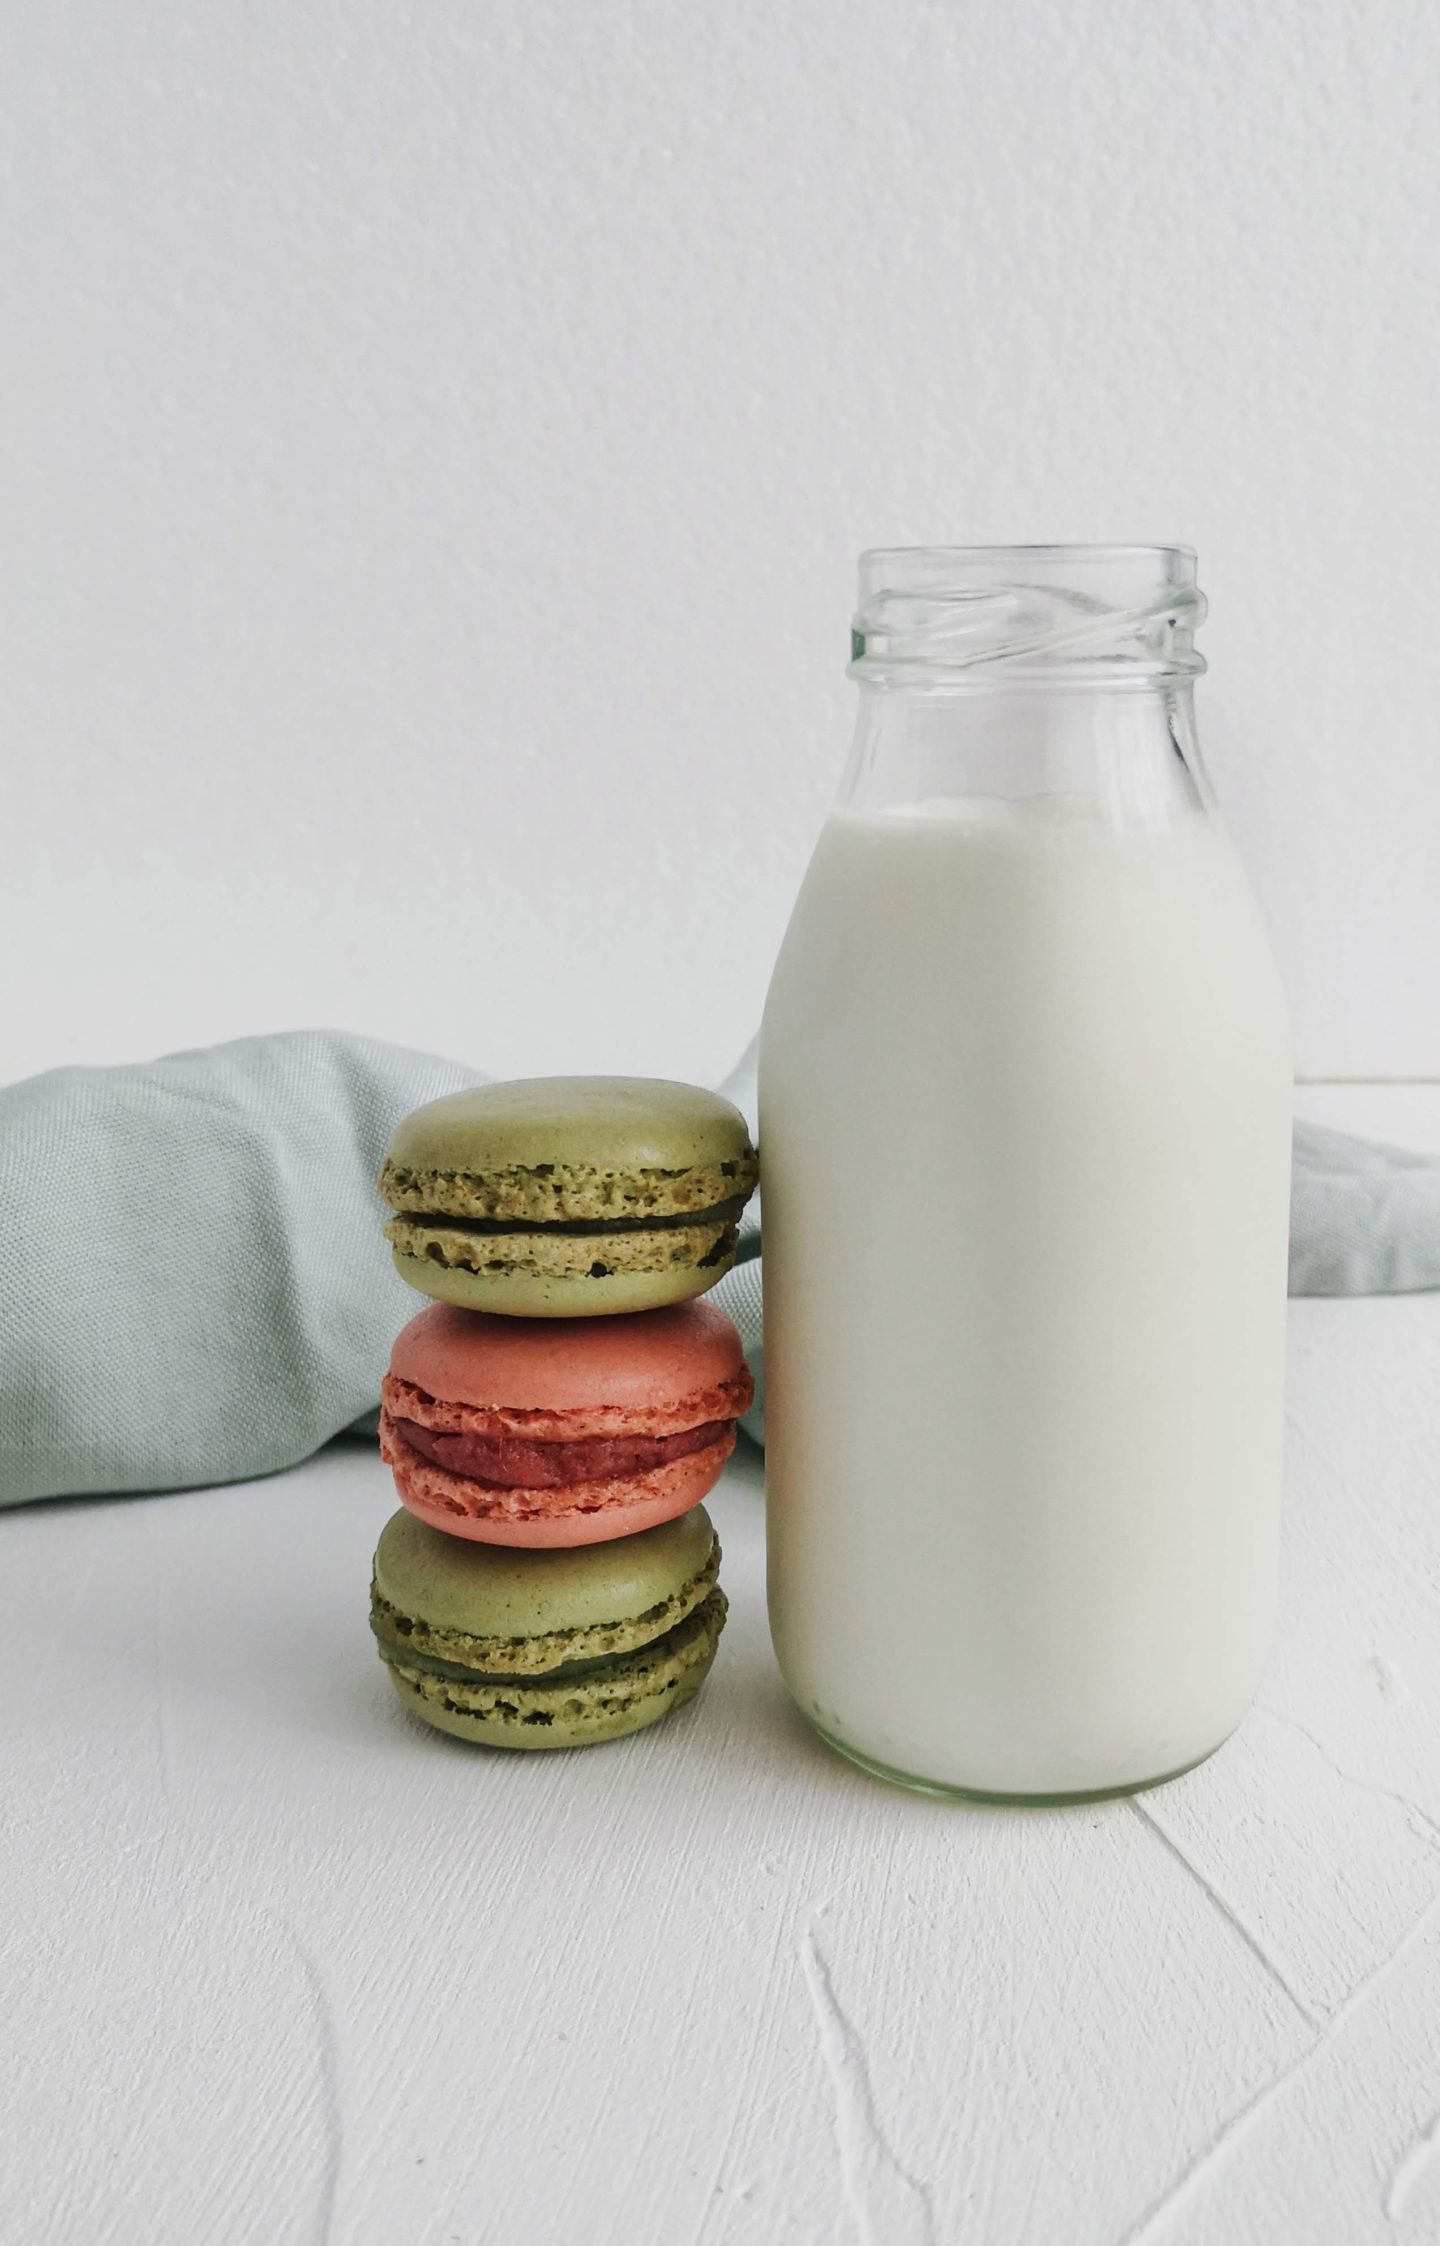 Bottle of milk and macarons for healthy lifestyle changes